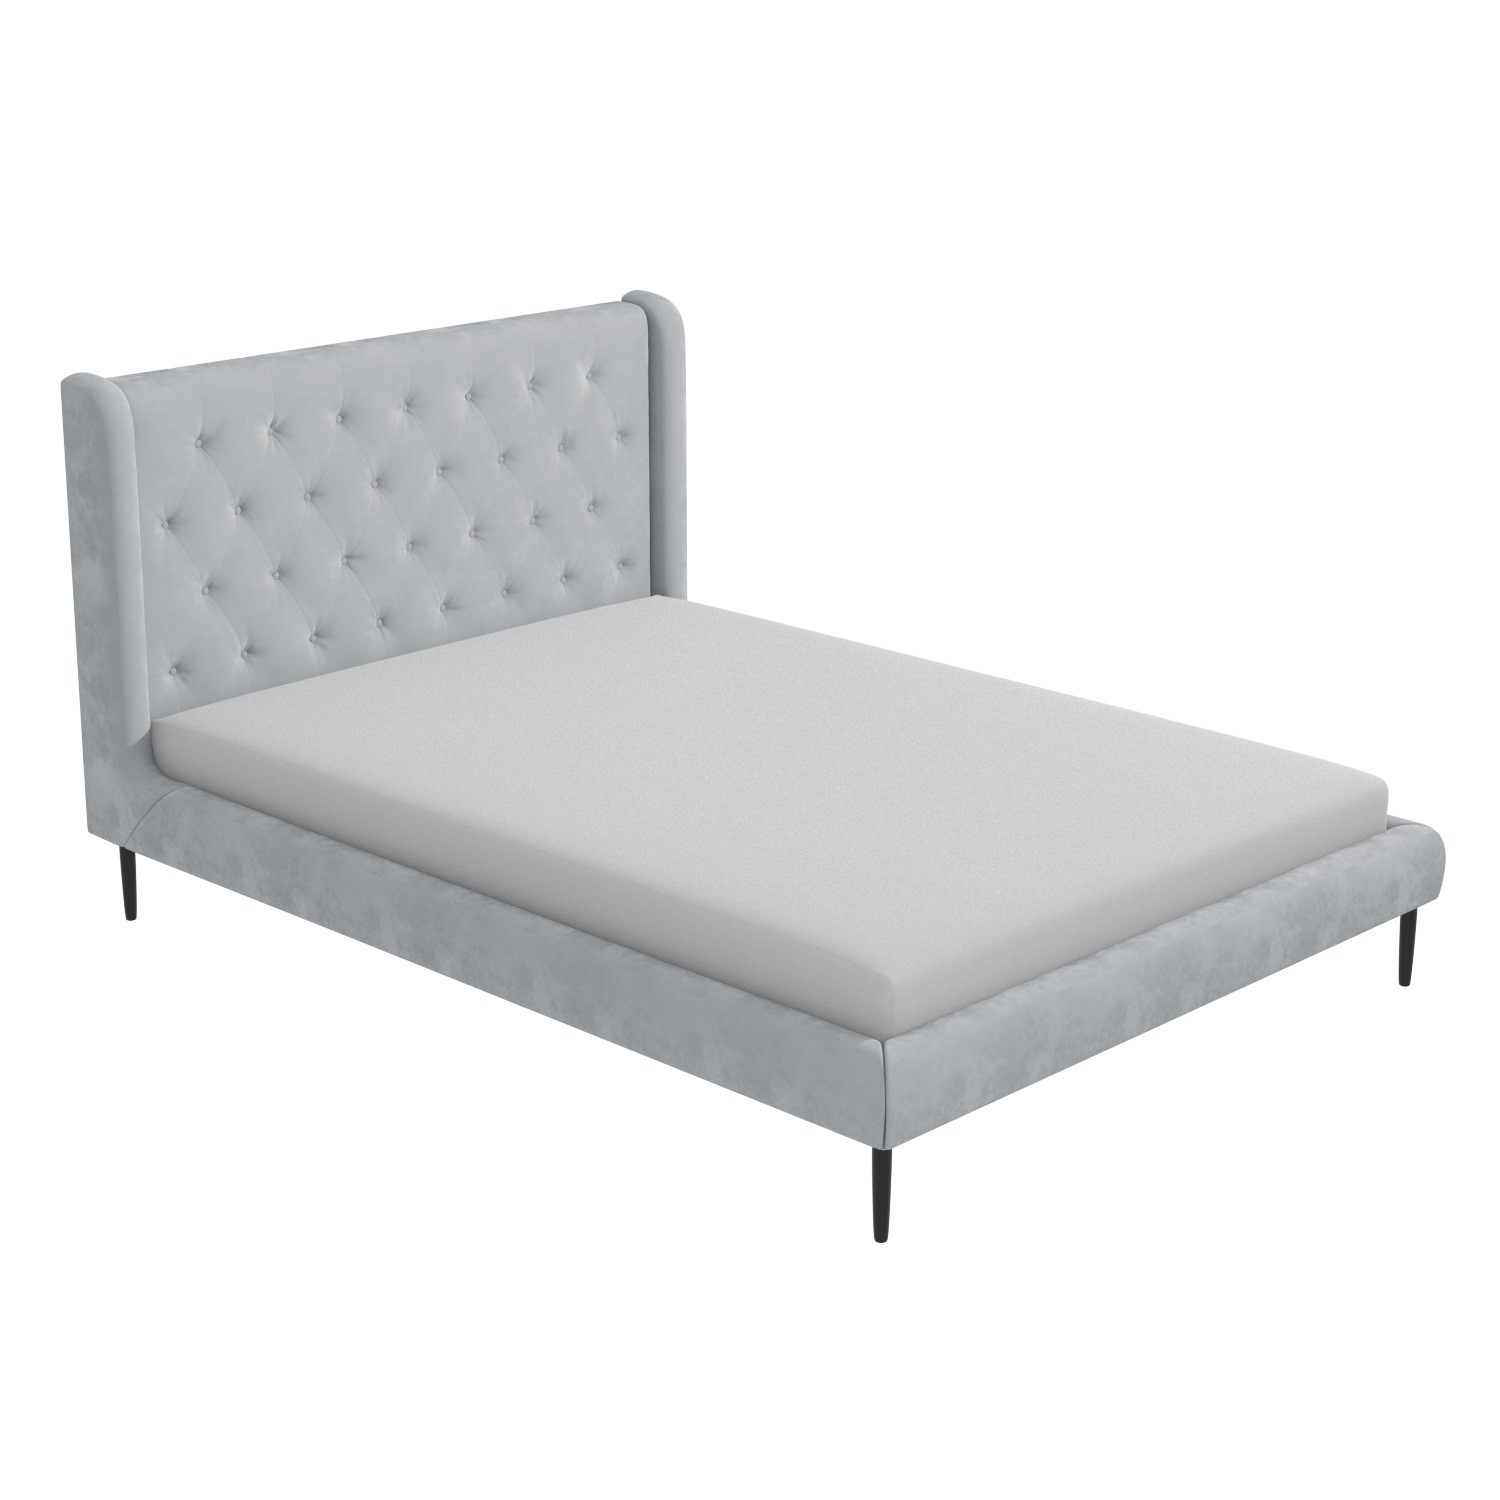 Amara King Size Bed Frame In Silver, How Wide Is A King Size Bed Frame